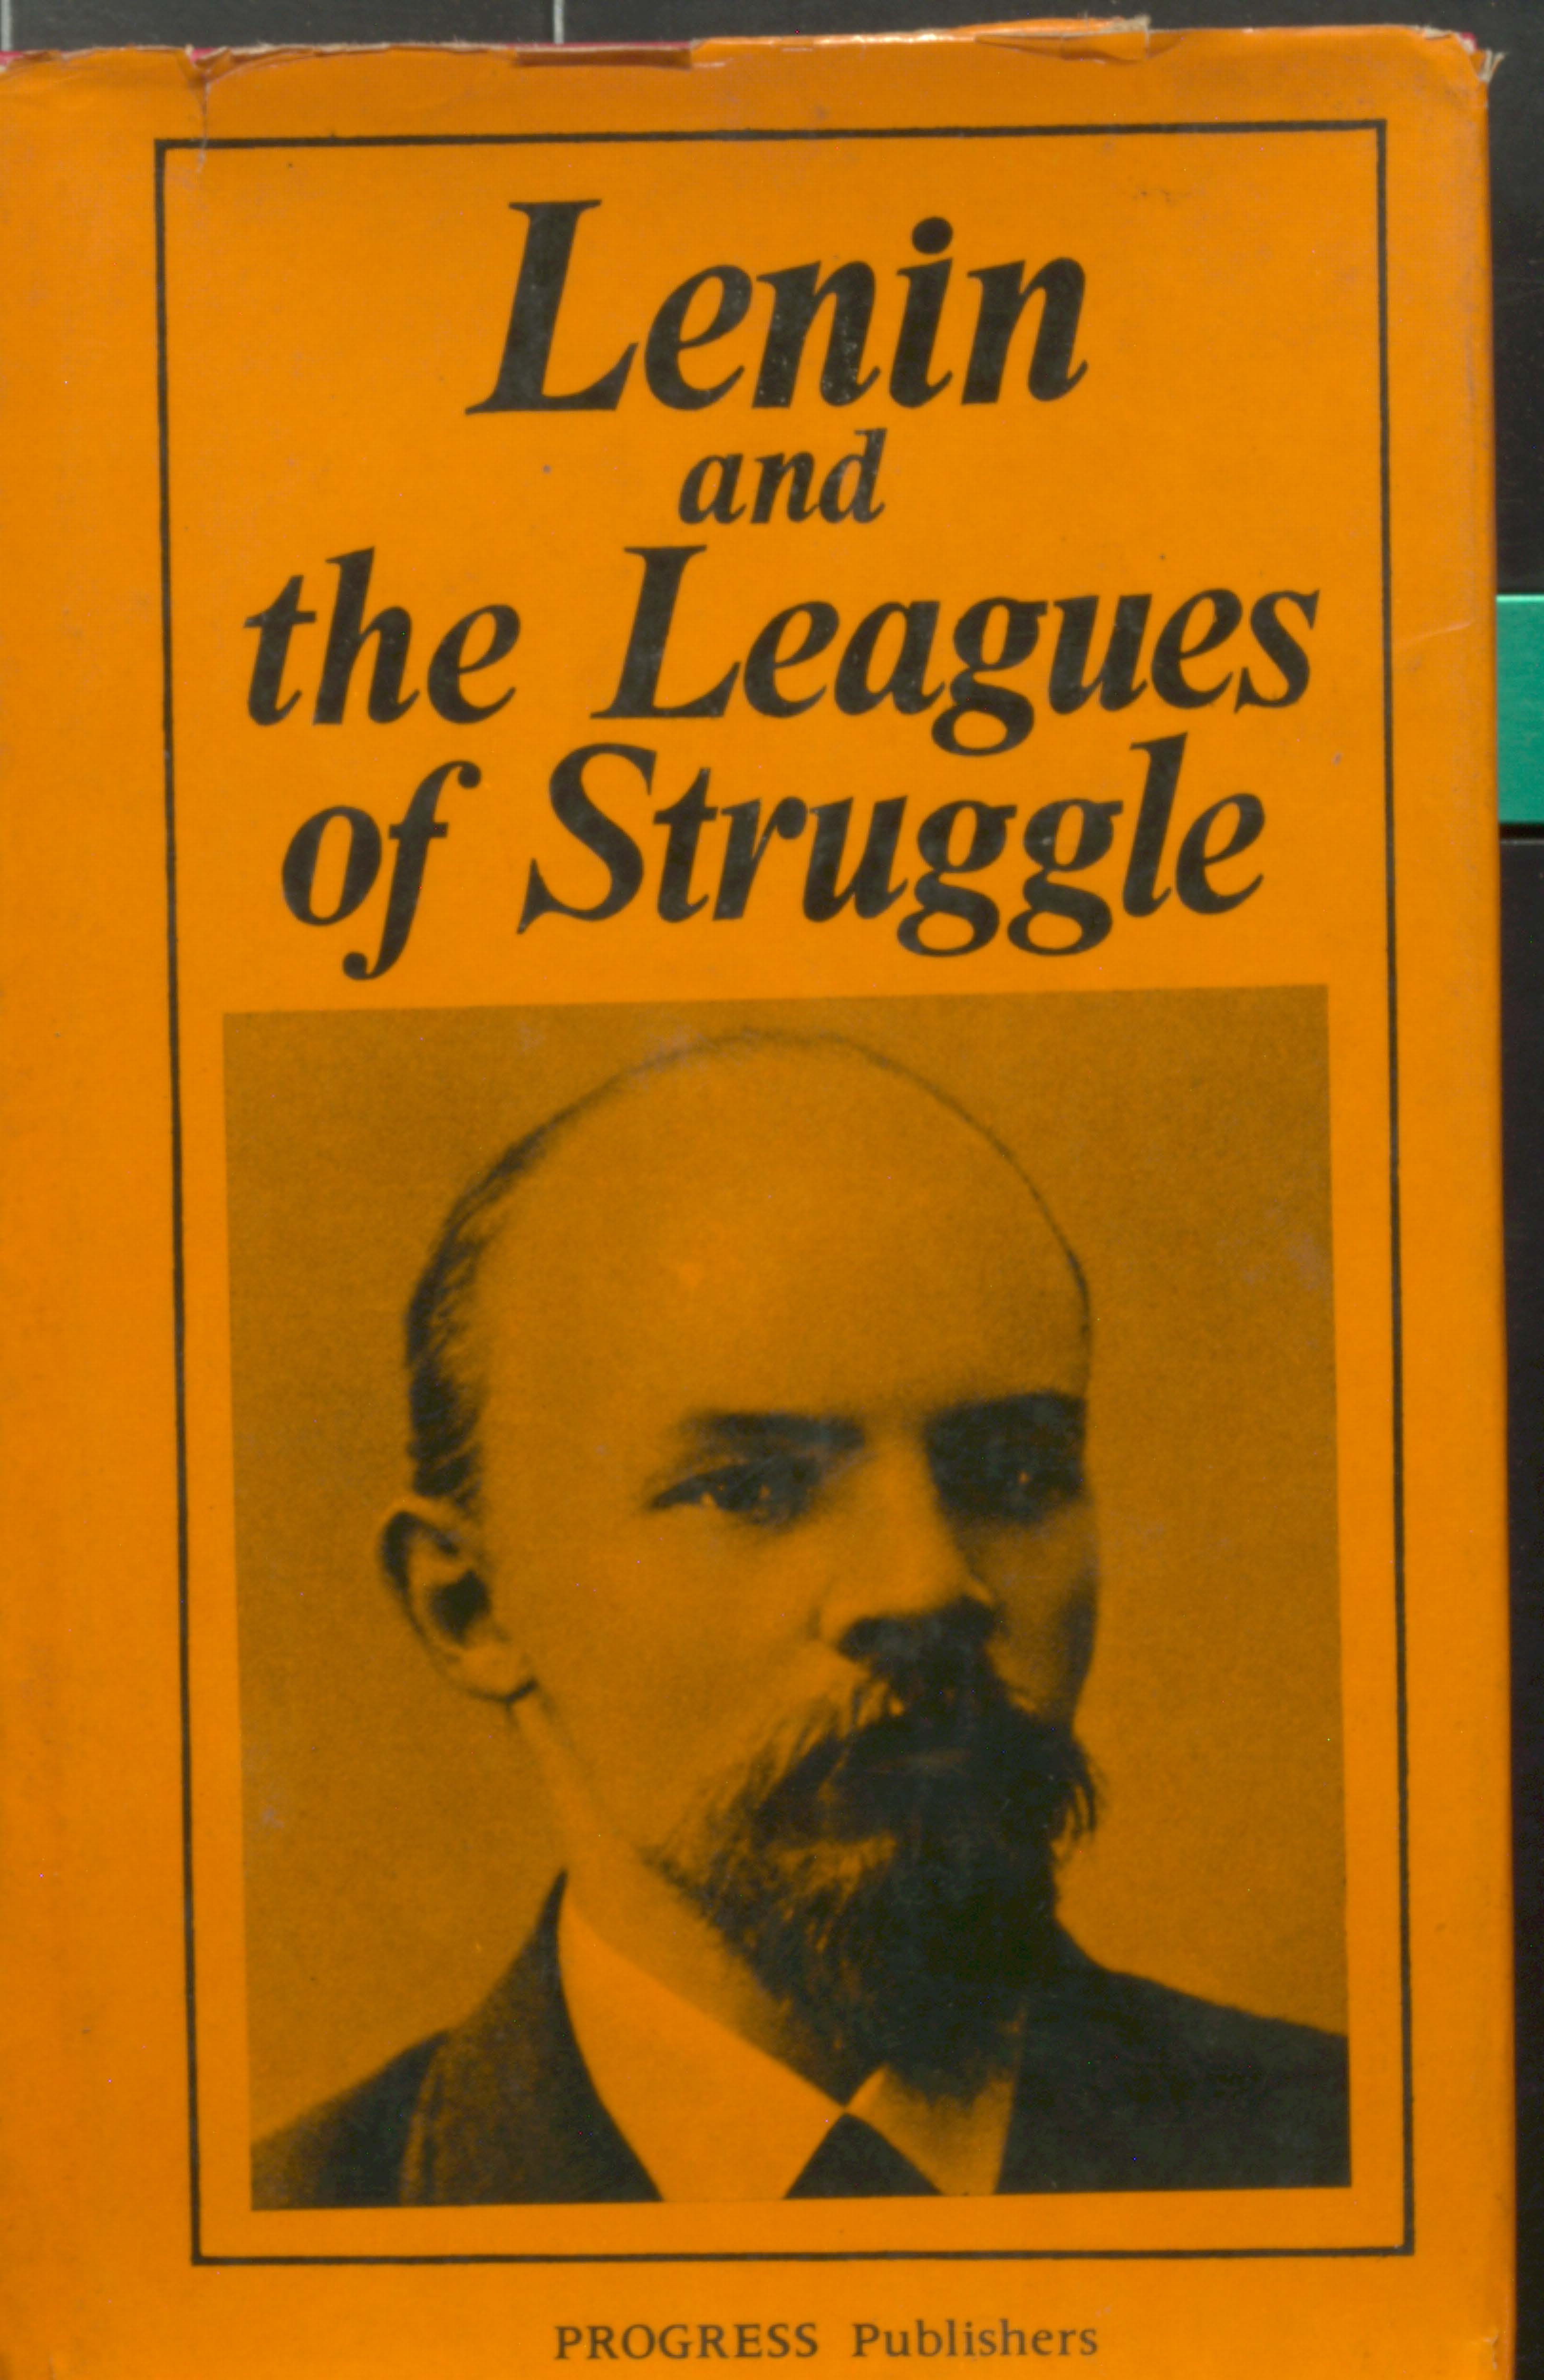 Lenin and the leagues of struggle